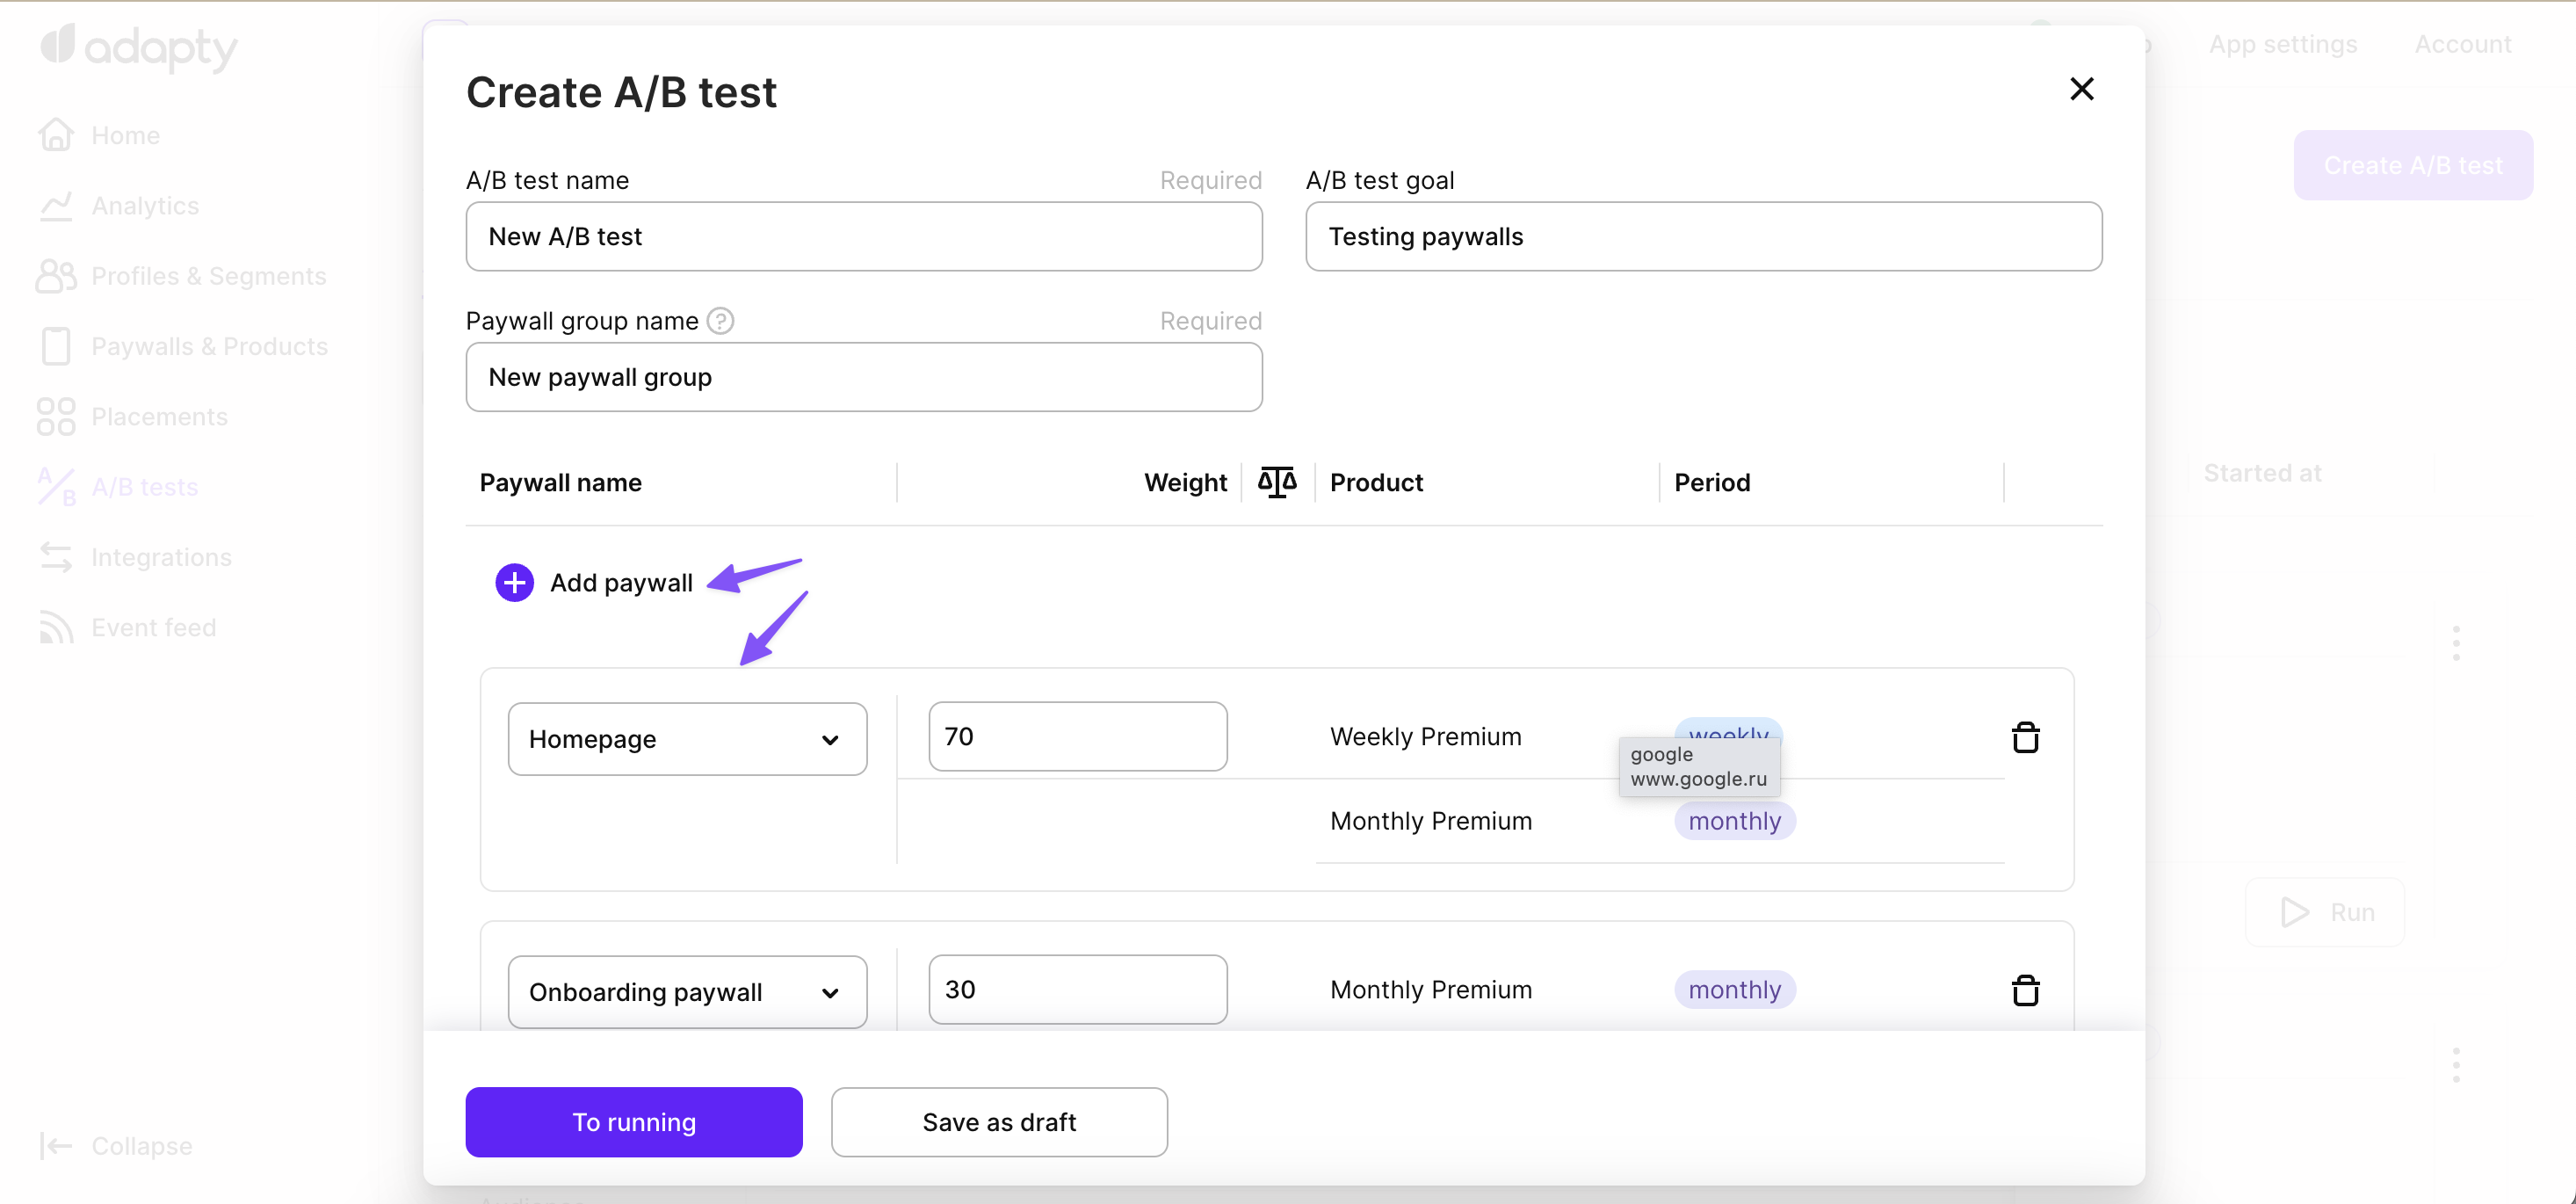 Create a new A/B test with Paywalls